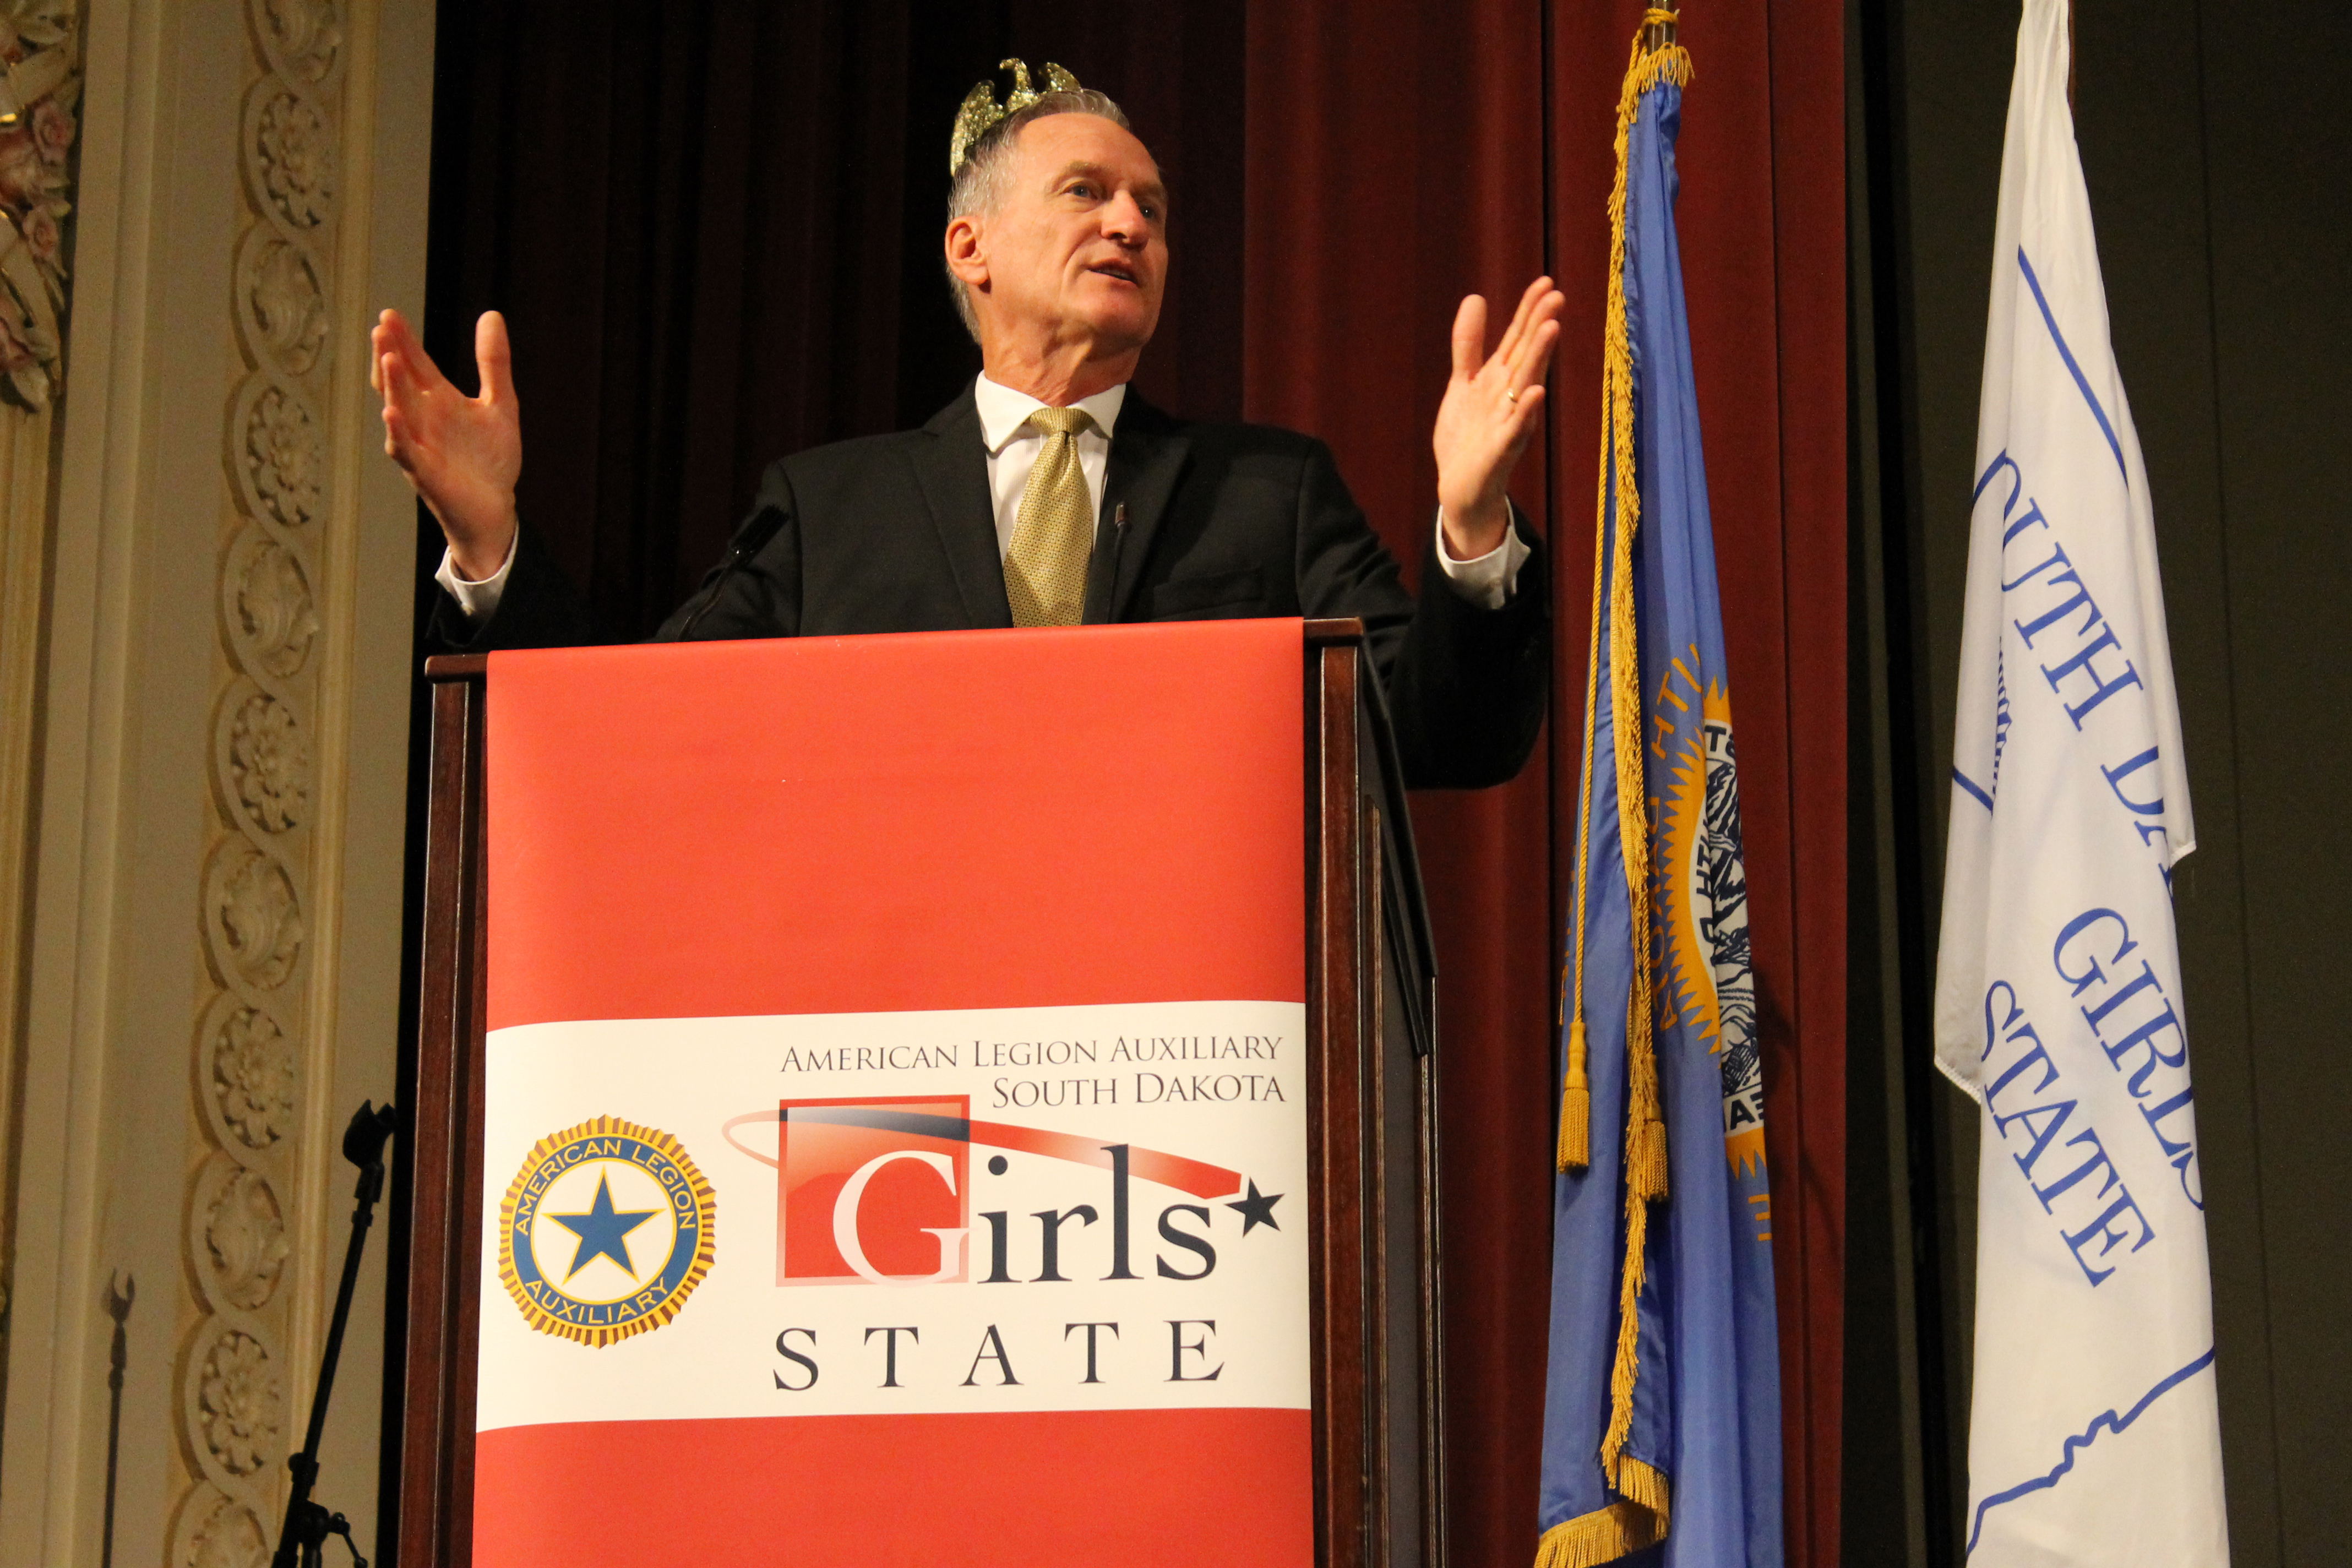 South Dakota Governor Dennis Daugaard: “Be engaged. Be the government. Be the leaders.”